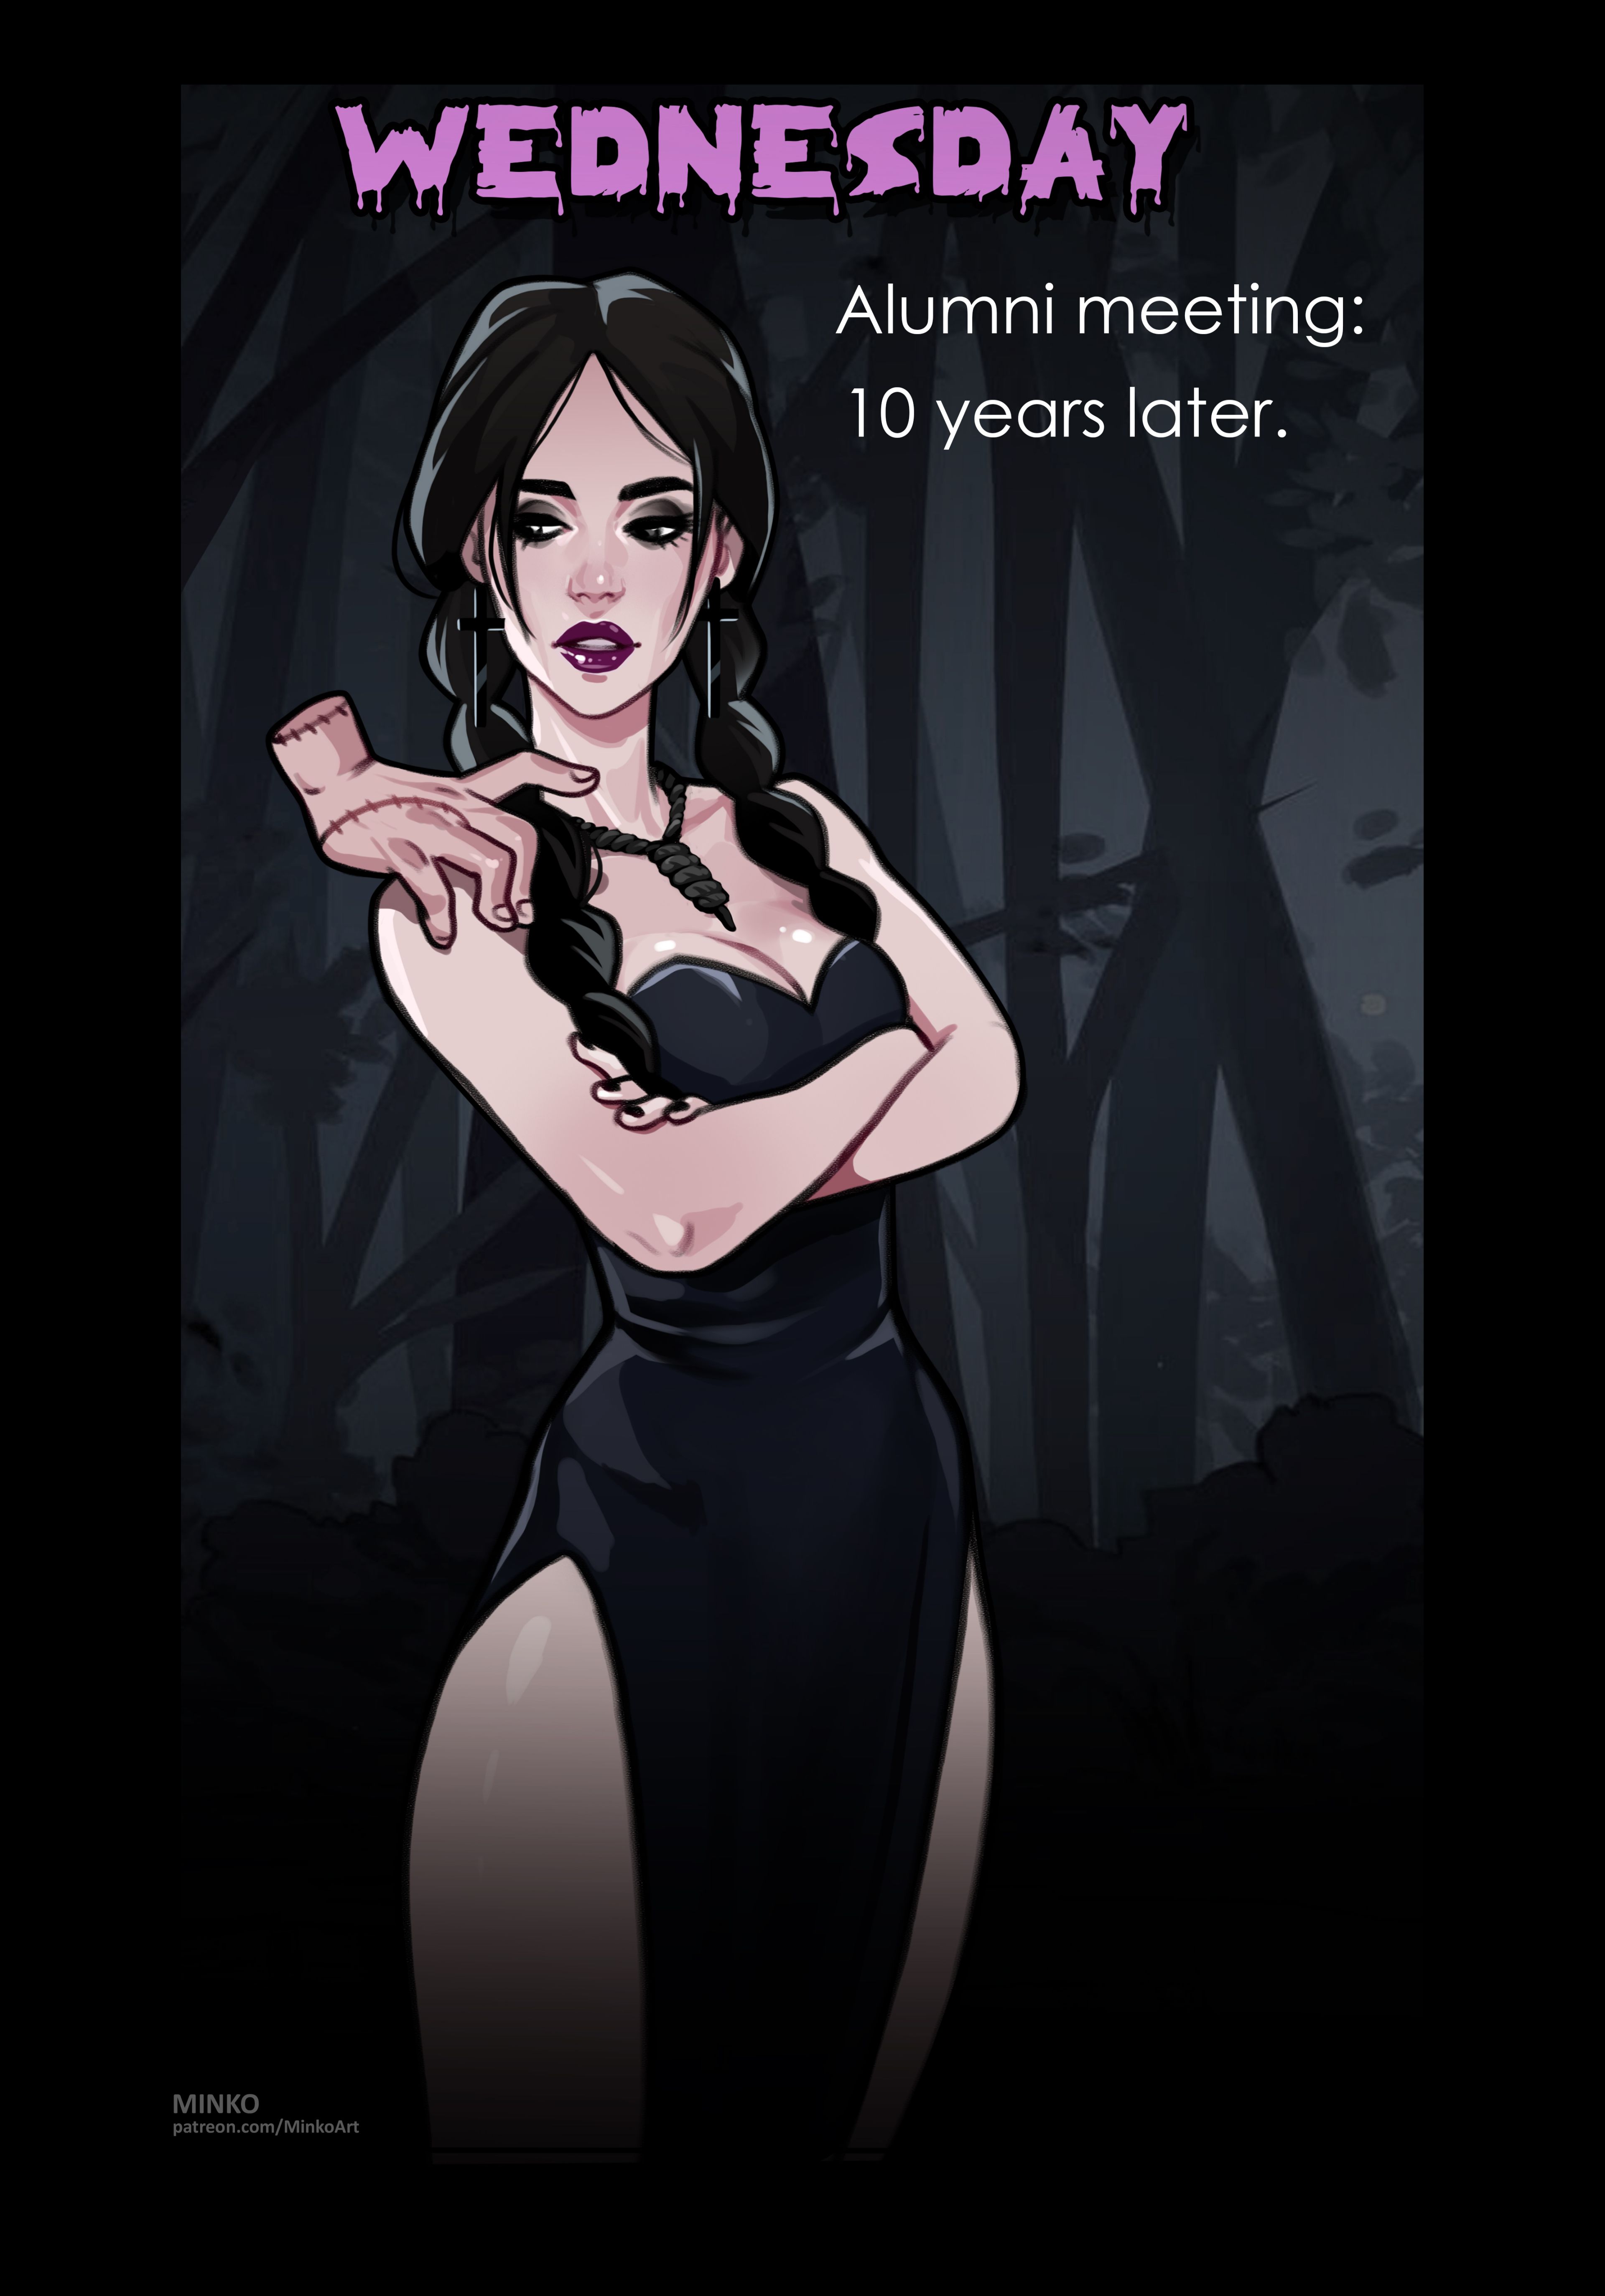 3840px x 5492px - Alumni meeting: 10 years later (Wednesday , Addams Family) [Olena Minko] -  1 . Alumni meeting: 10 years later - Chapter 1 (Wednesday , Addams Family)  [Olena Minko] - AllPornComic